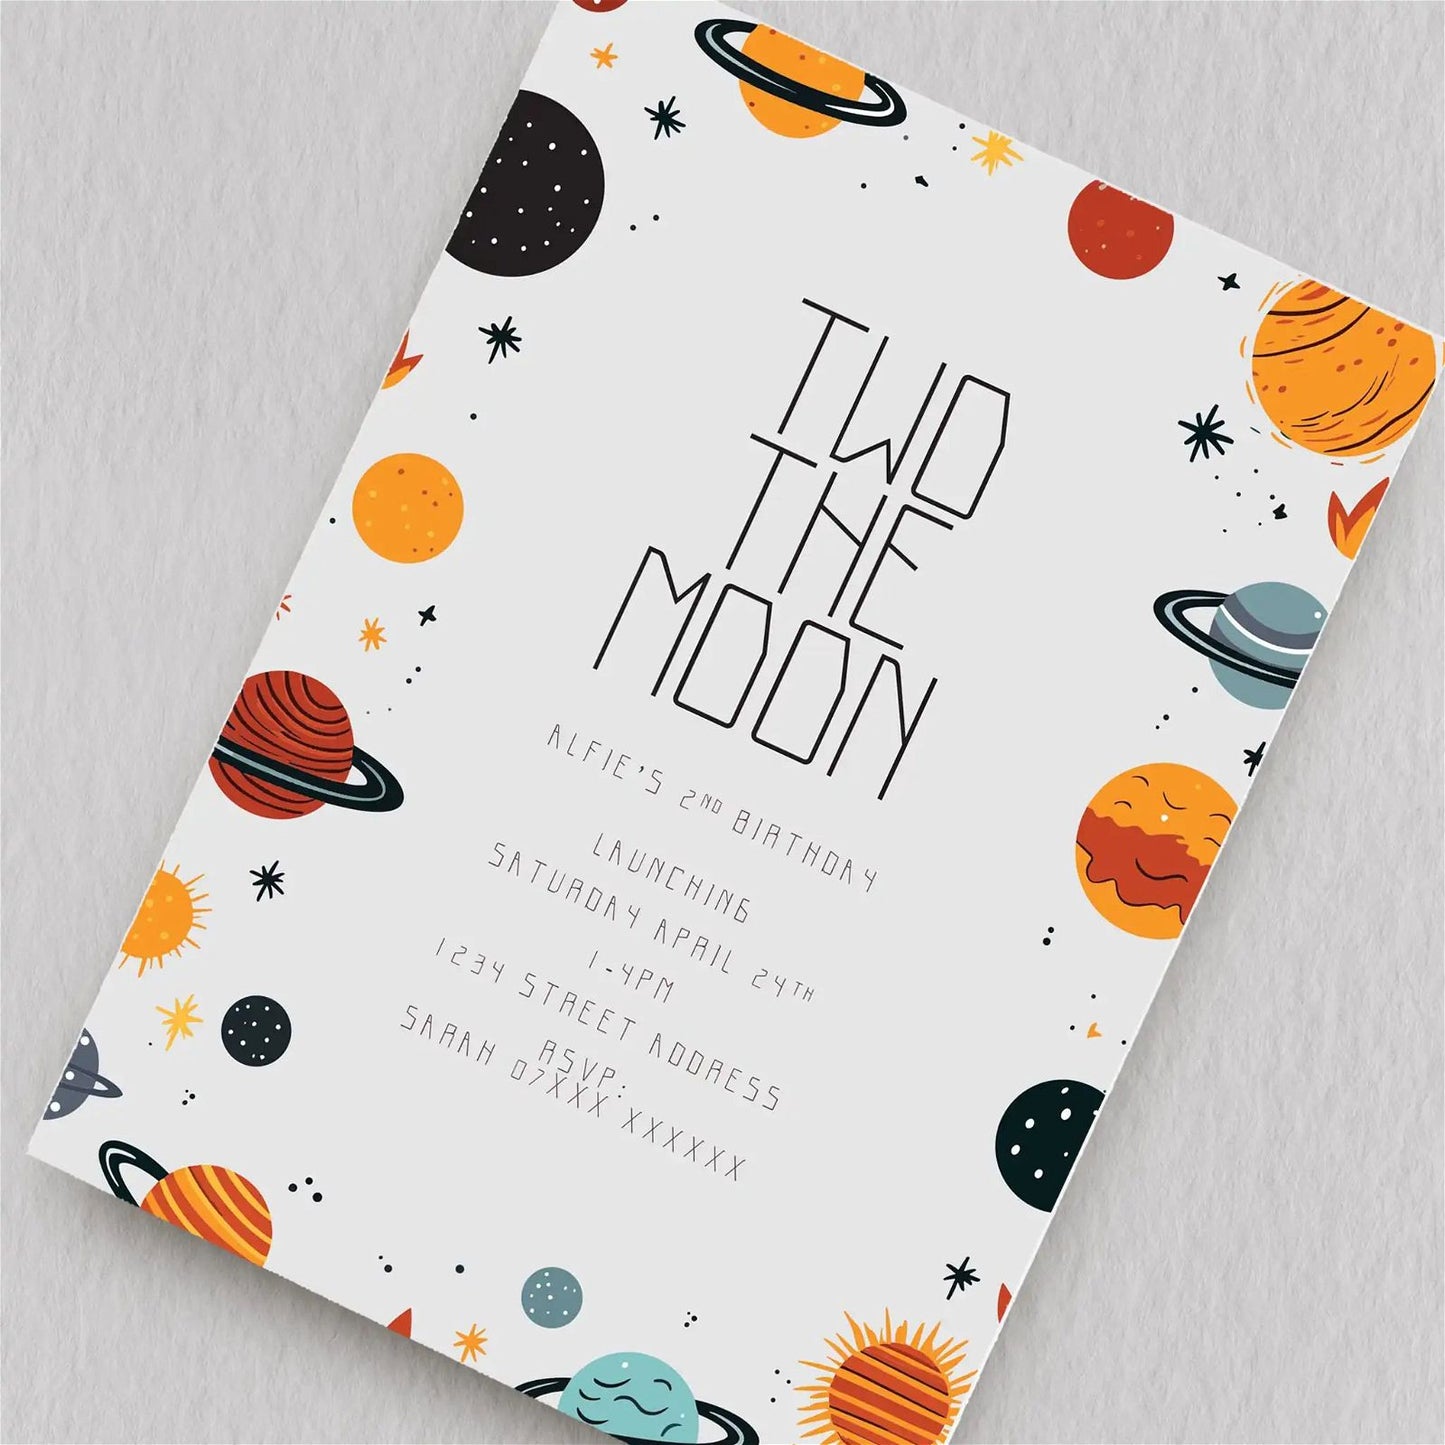 Two The Moon Birthday Invitation  Ivy and Gold Wedding Stationery   